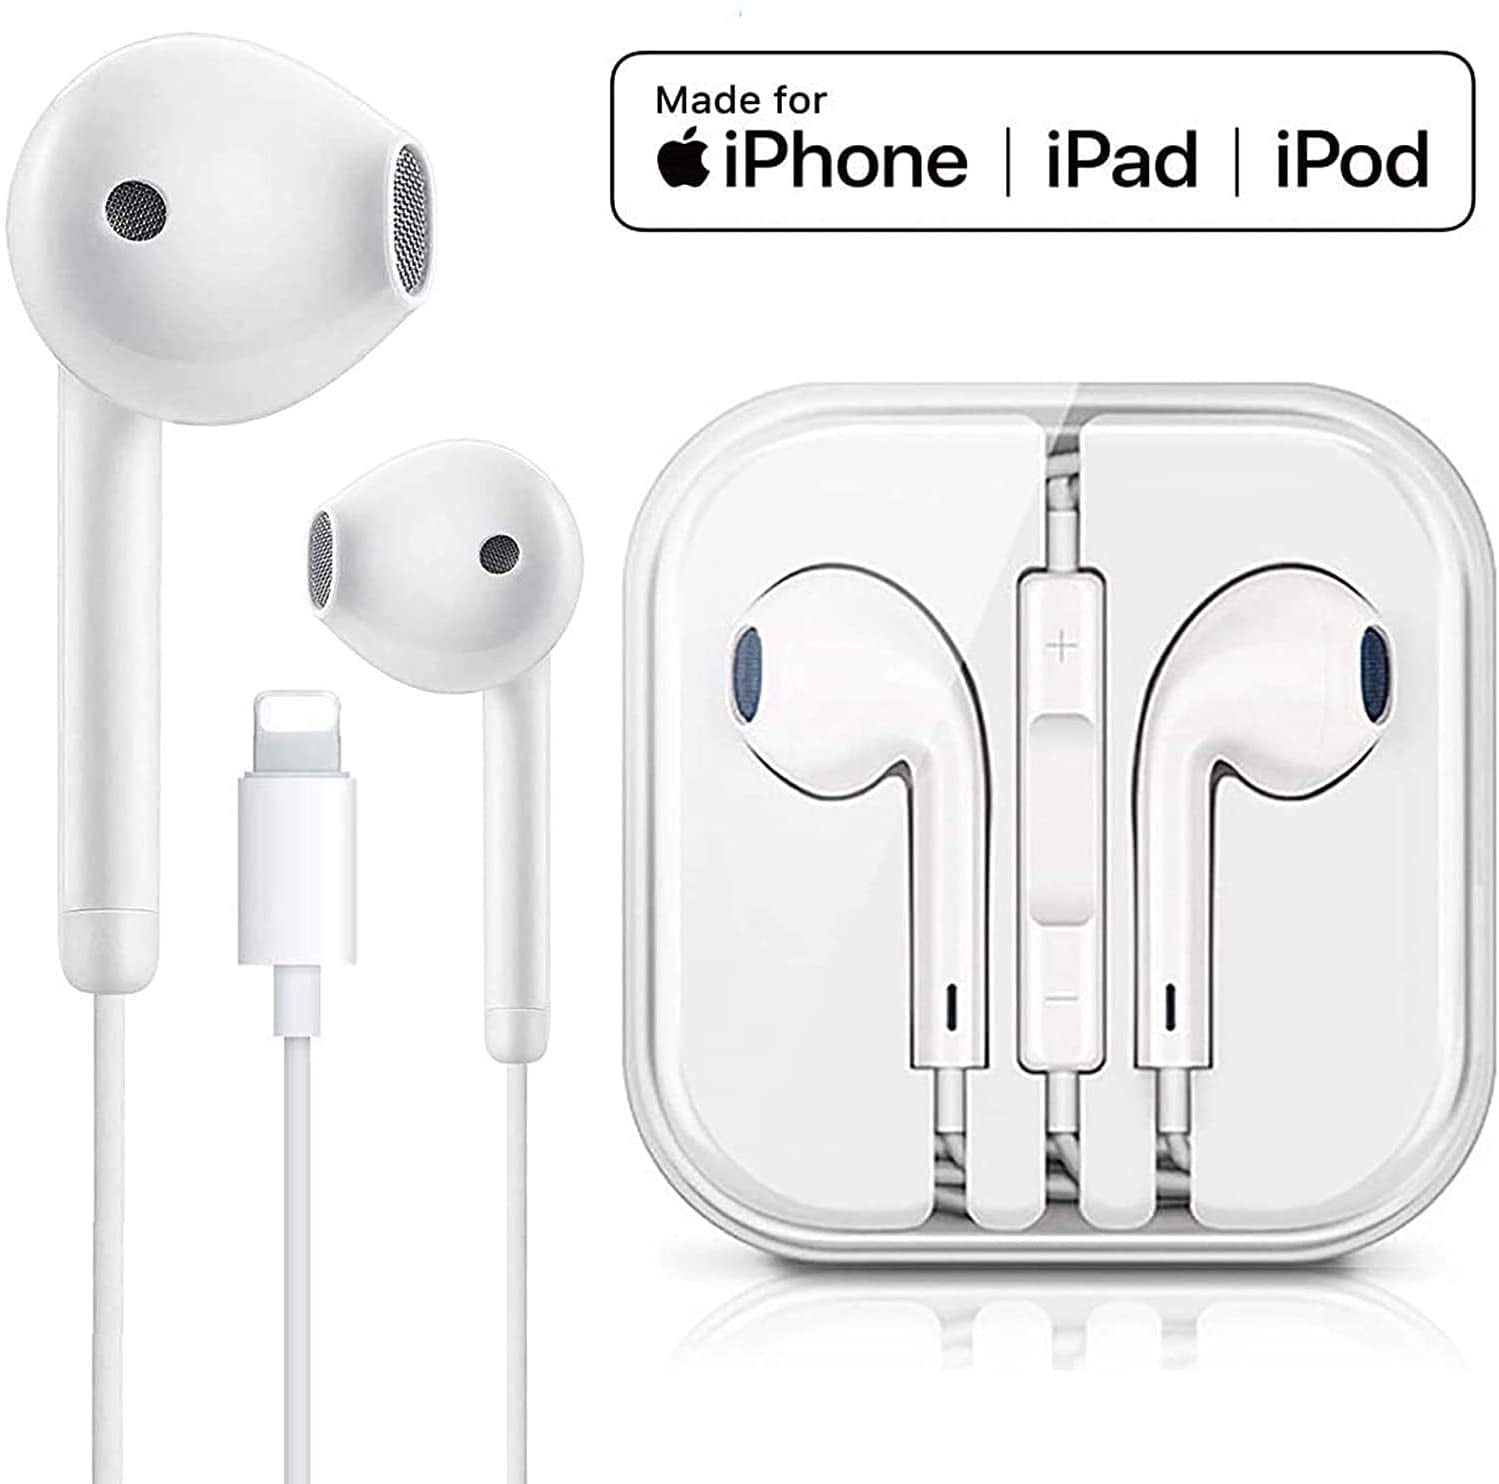 Headphones/Earbuds/Earphones Wired Headphones Noise Isolating Earphones Built-in Microphone with Remote & Micphone Compatible with iPhone 7/7plus 8/8plus X/Xs/XR/Xs max/11/12/pro/se iPad/iPod-06